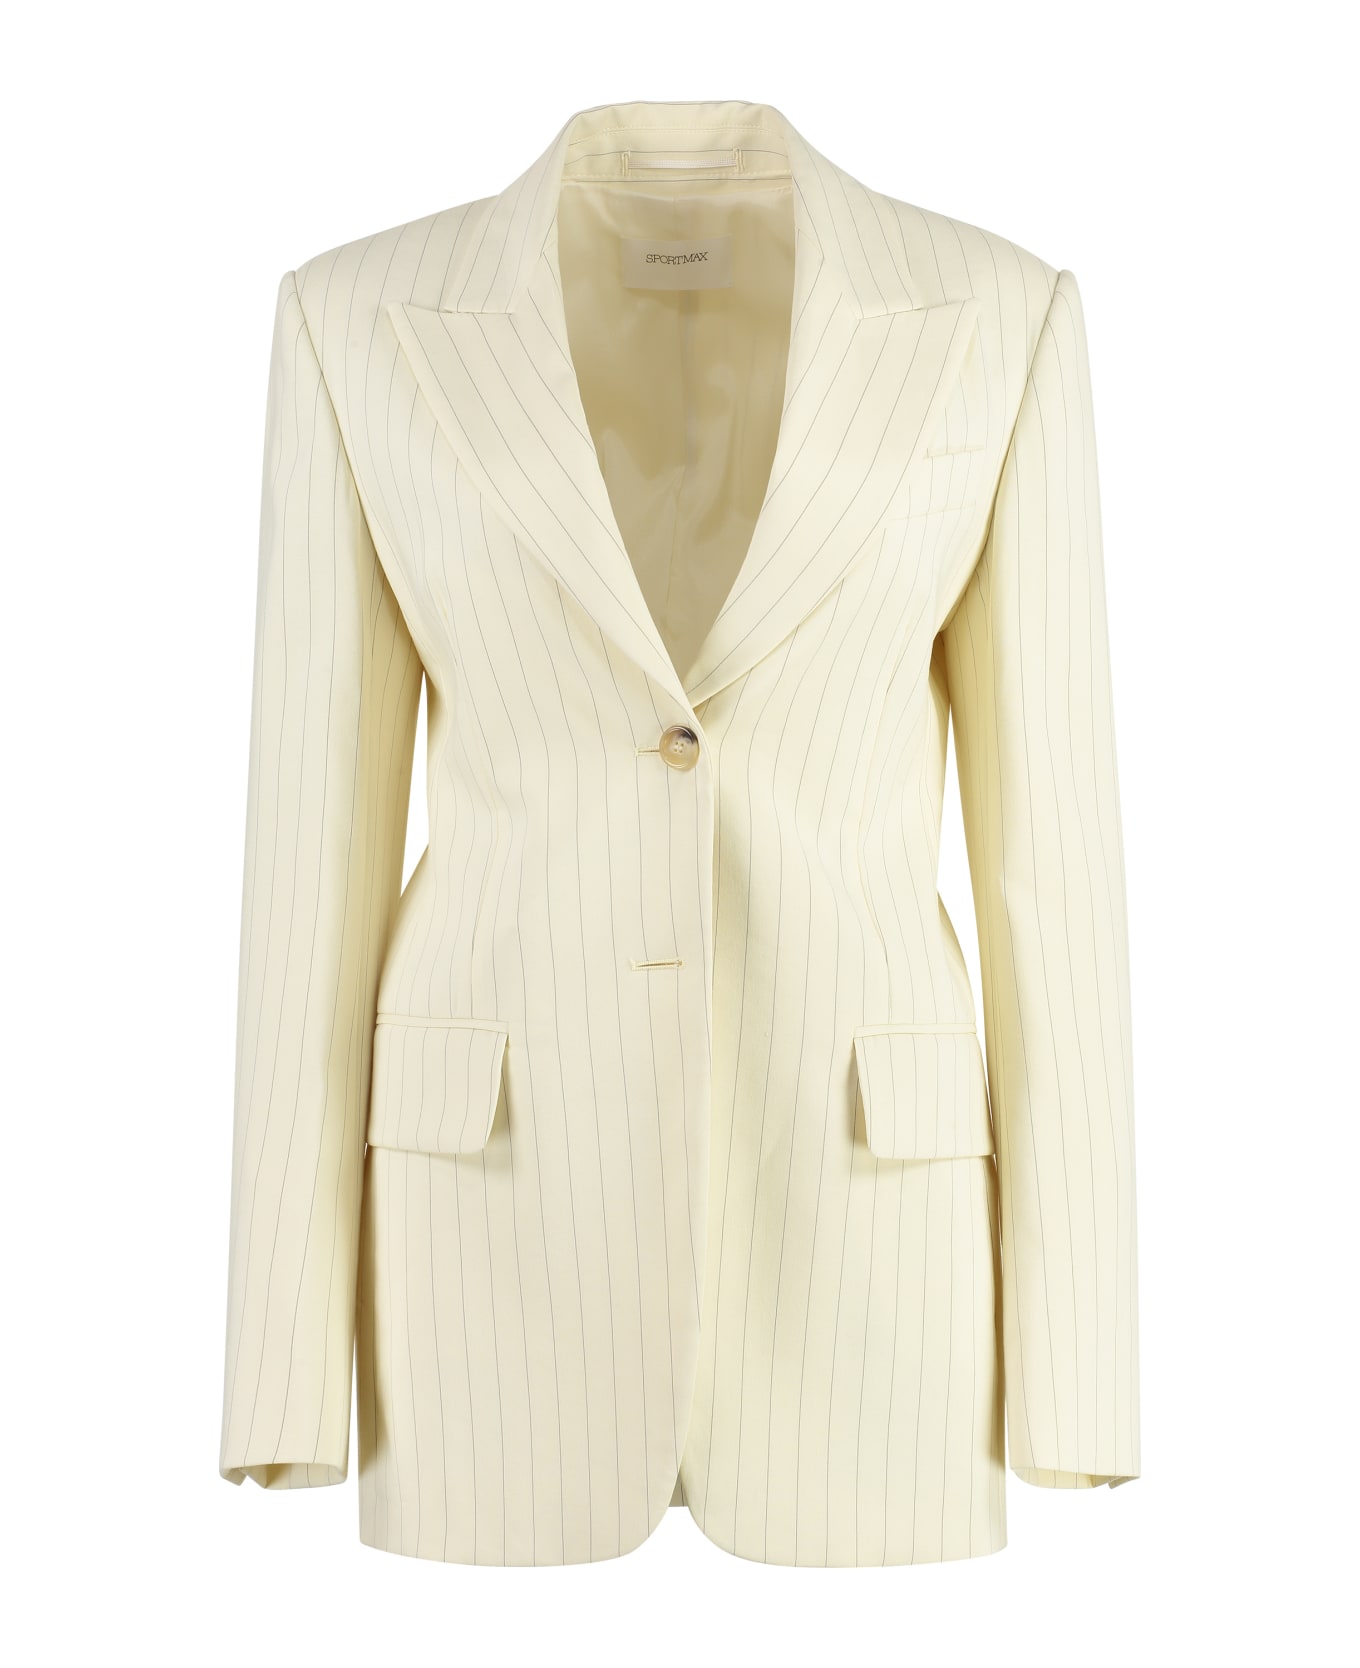 SportMax Single-breasted Two-button Jacket - Ivory